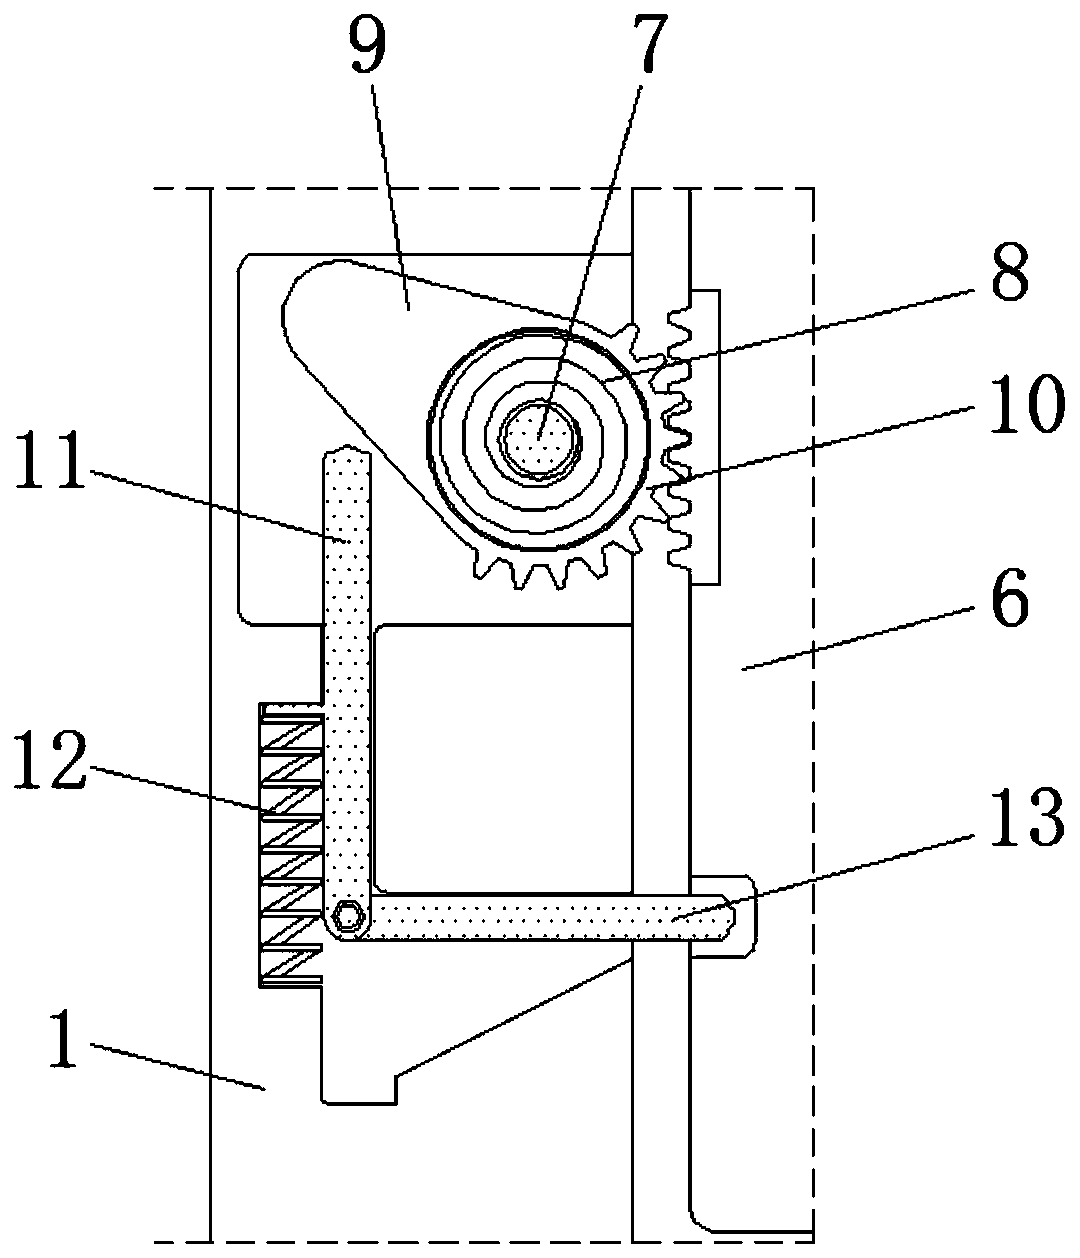 Computer hard disk mounting structure with heat dissipation and exhaust functions